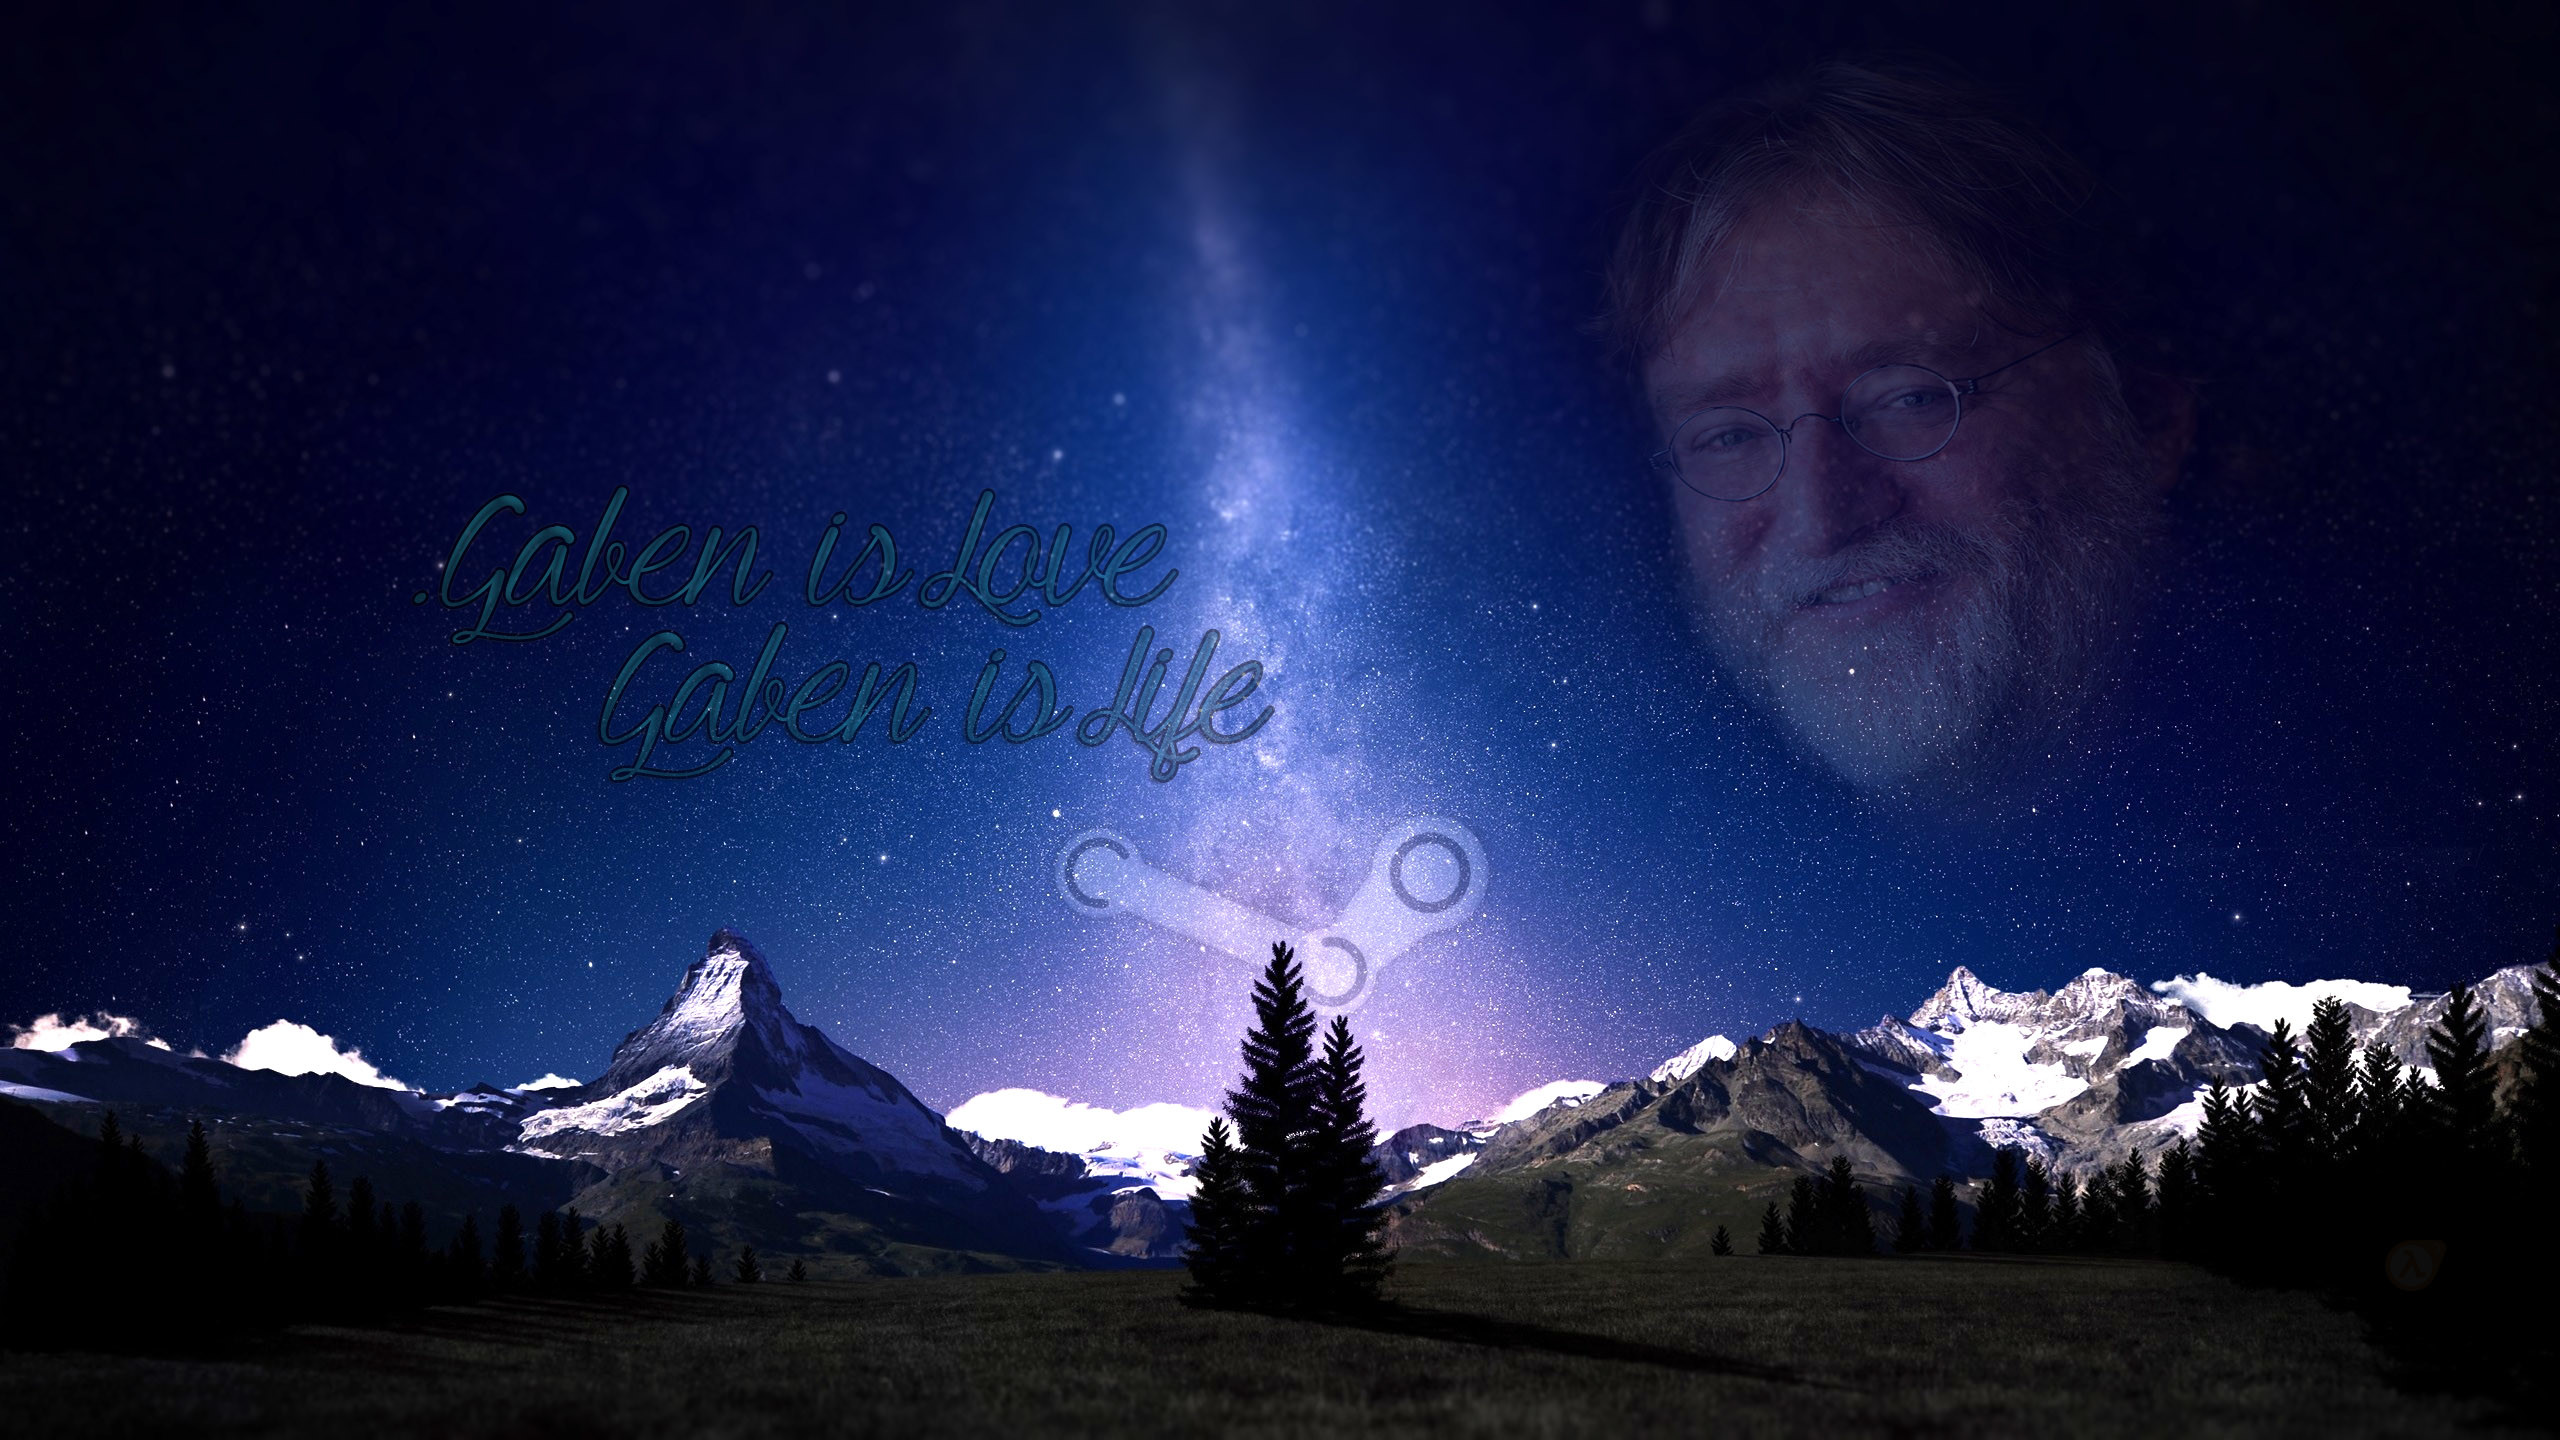 2560x1440 I created this wallpaper to please our lord.